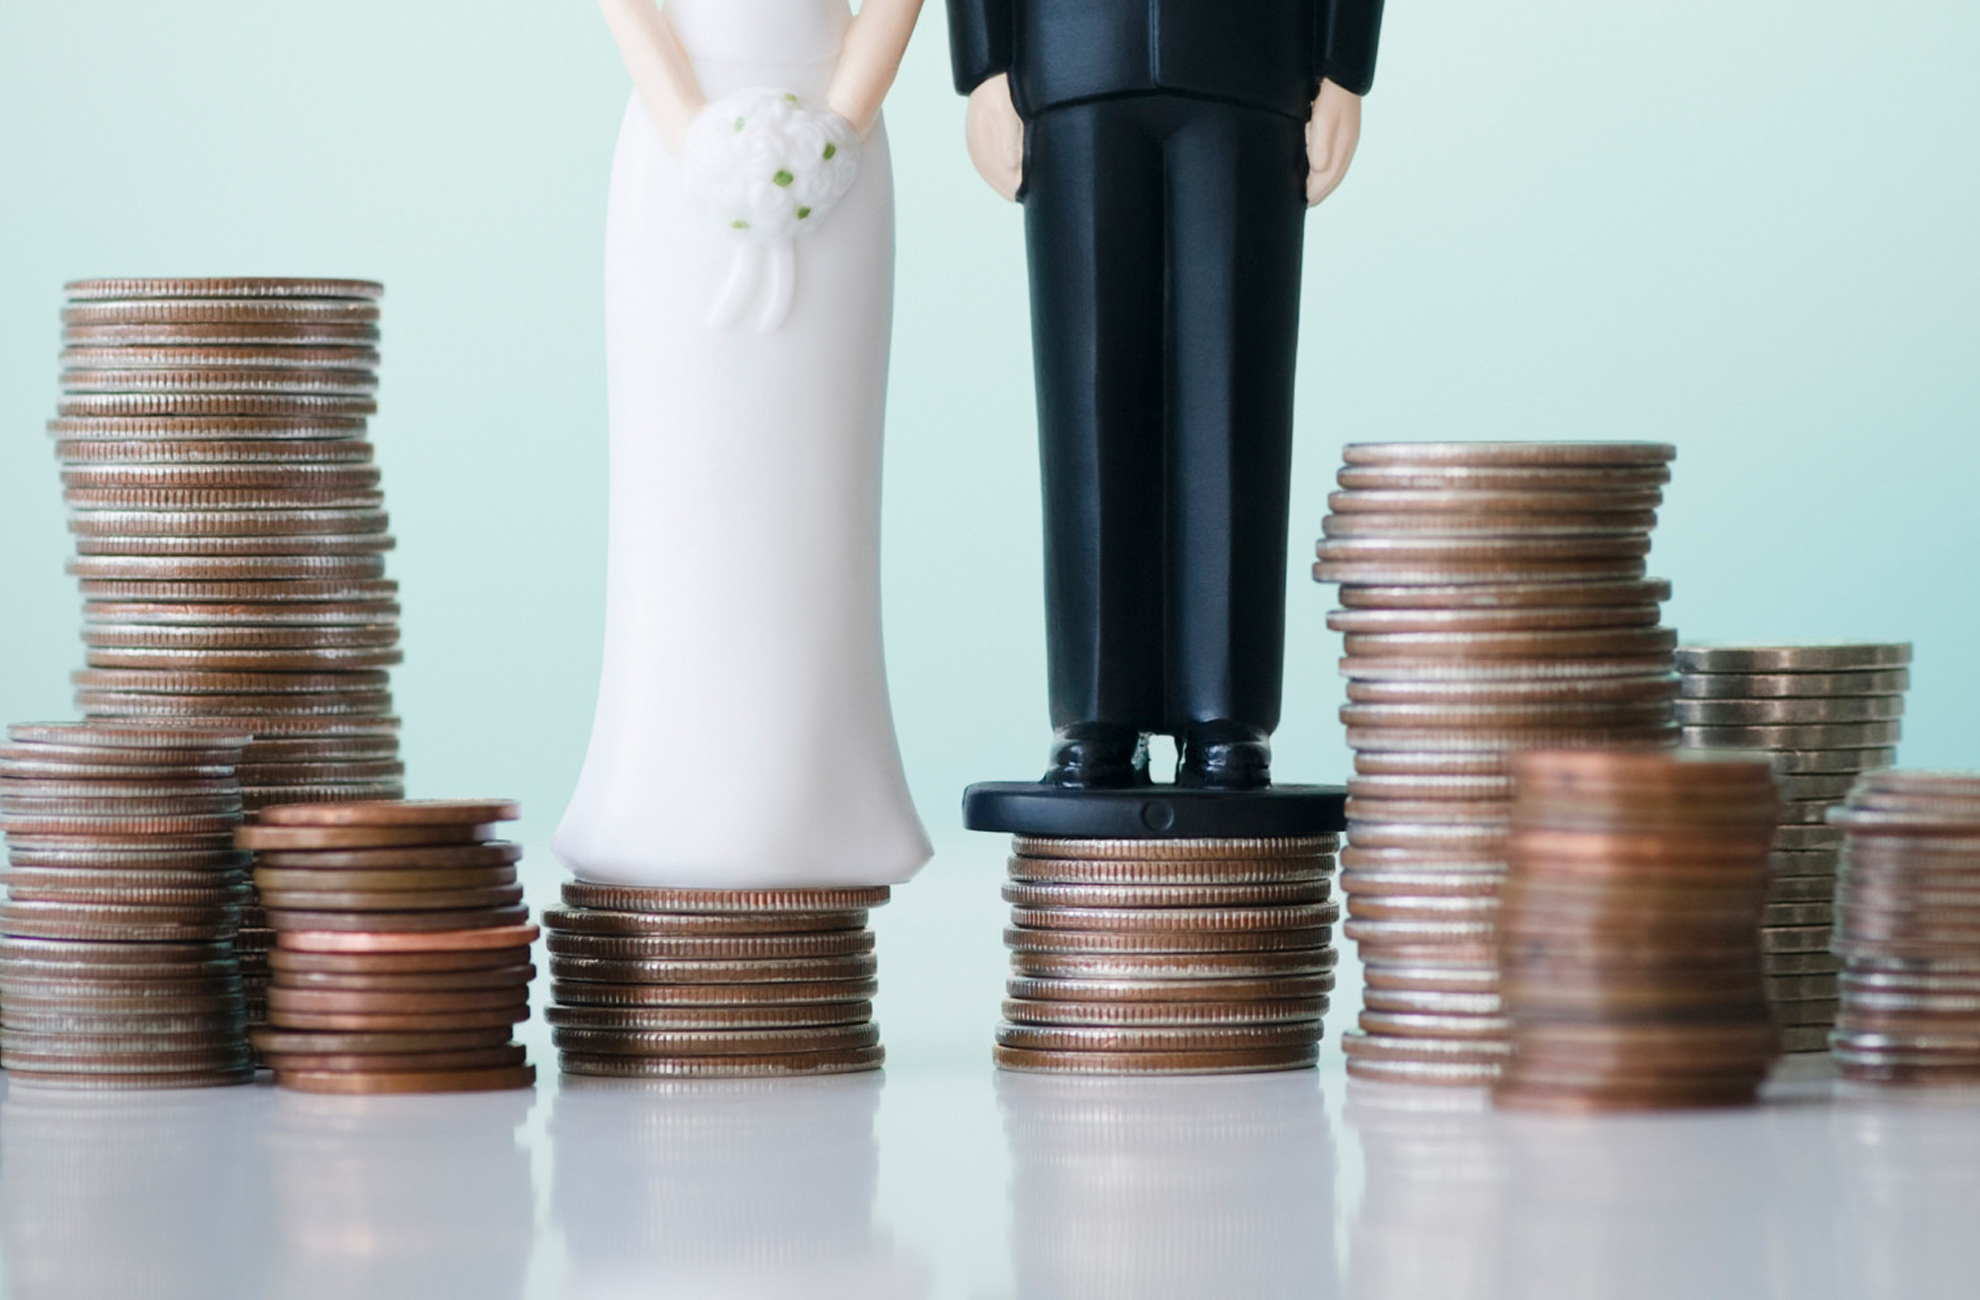 A bride and groom cake topper sit on top of coins – wedding budget